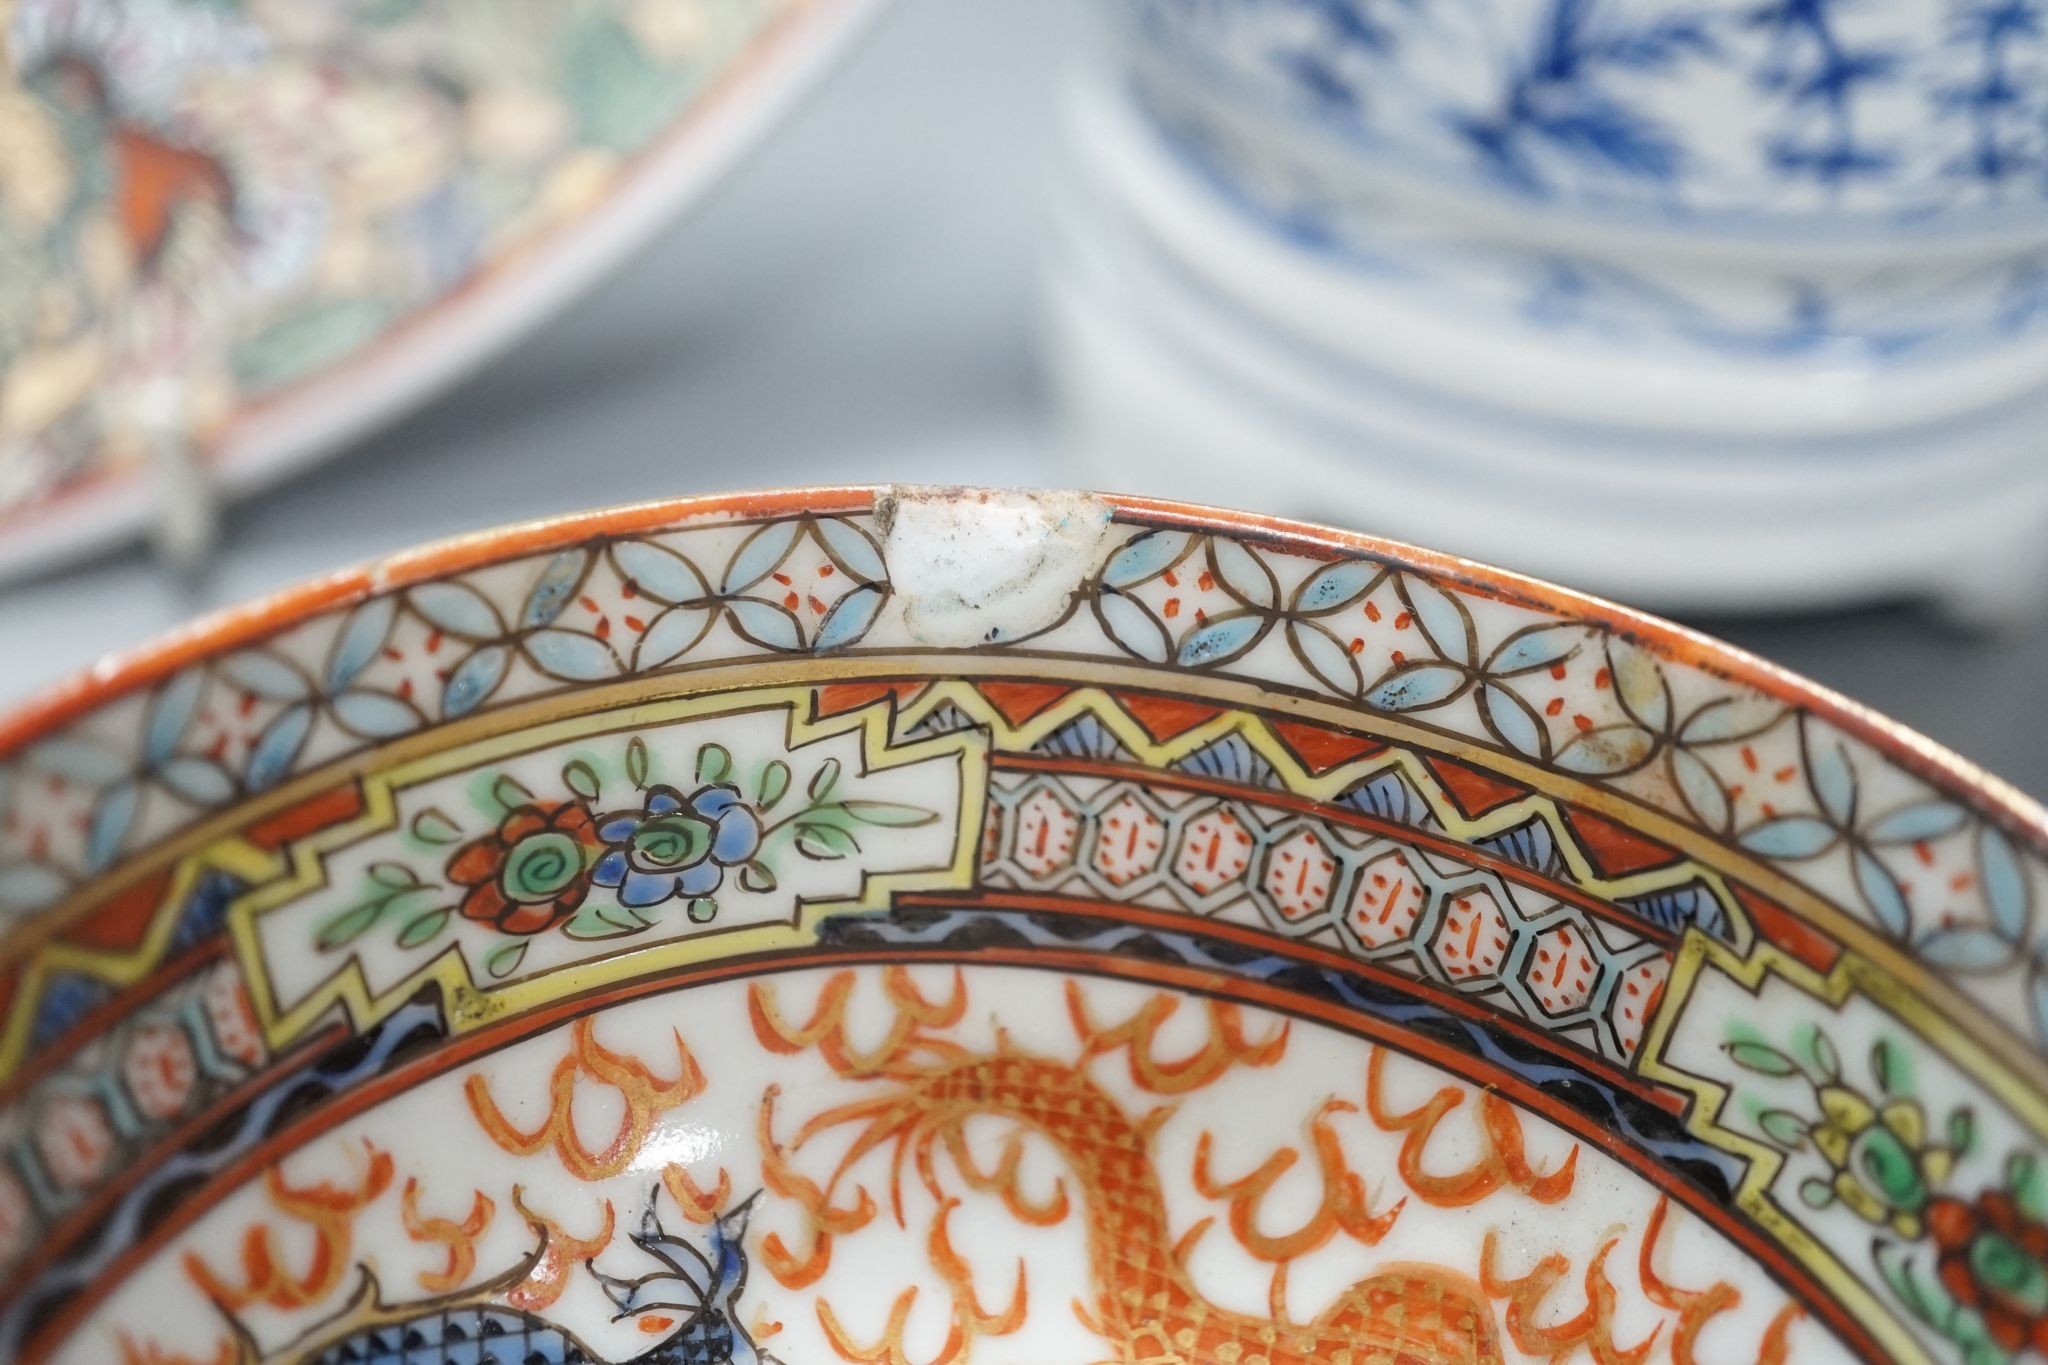 A Chinese brushpot, famille rose dish and a 'dragon' bowl, largest measurement 31cm